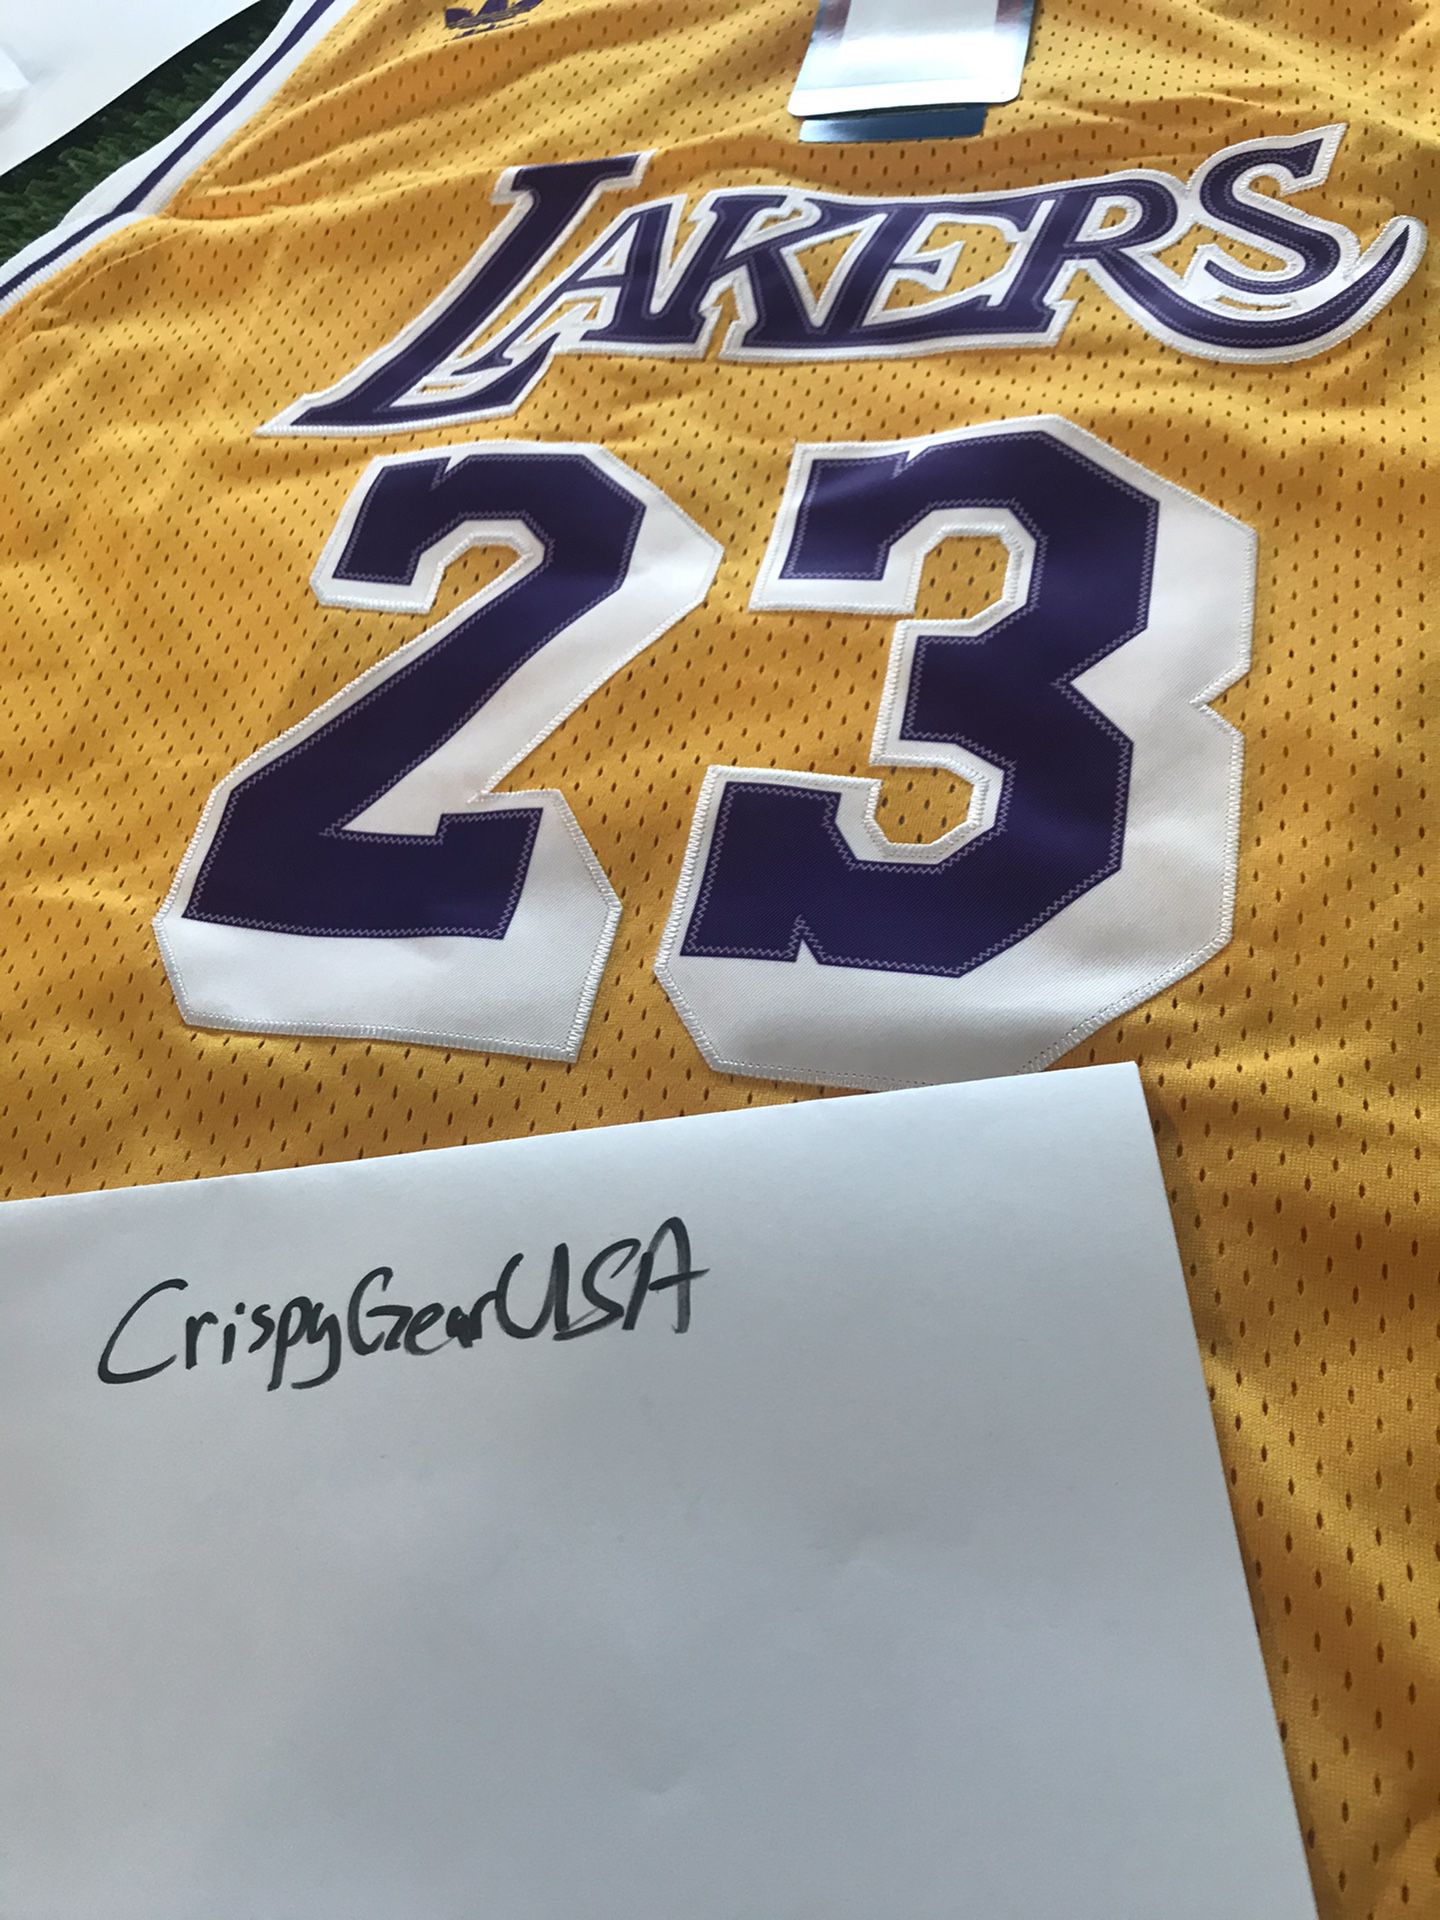 Lebron James Jersey Lakers S M L XL 2xl for Sale in Costa Mesa, CA - OfferUp